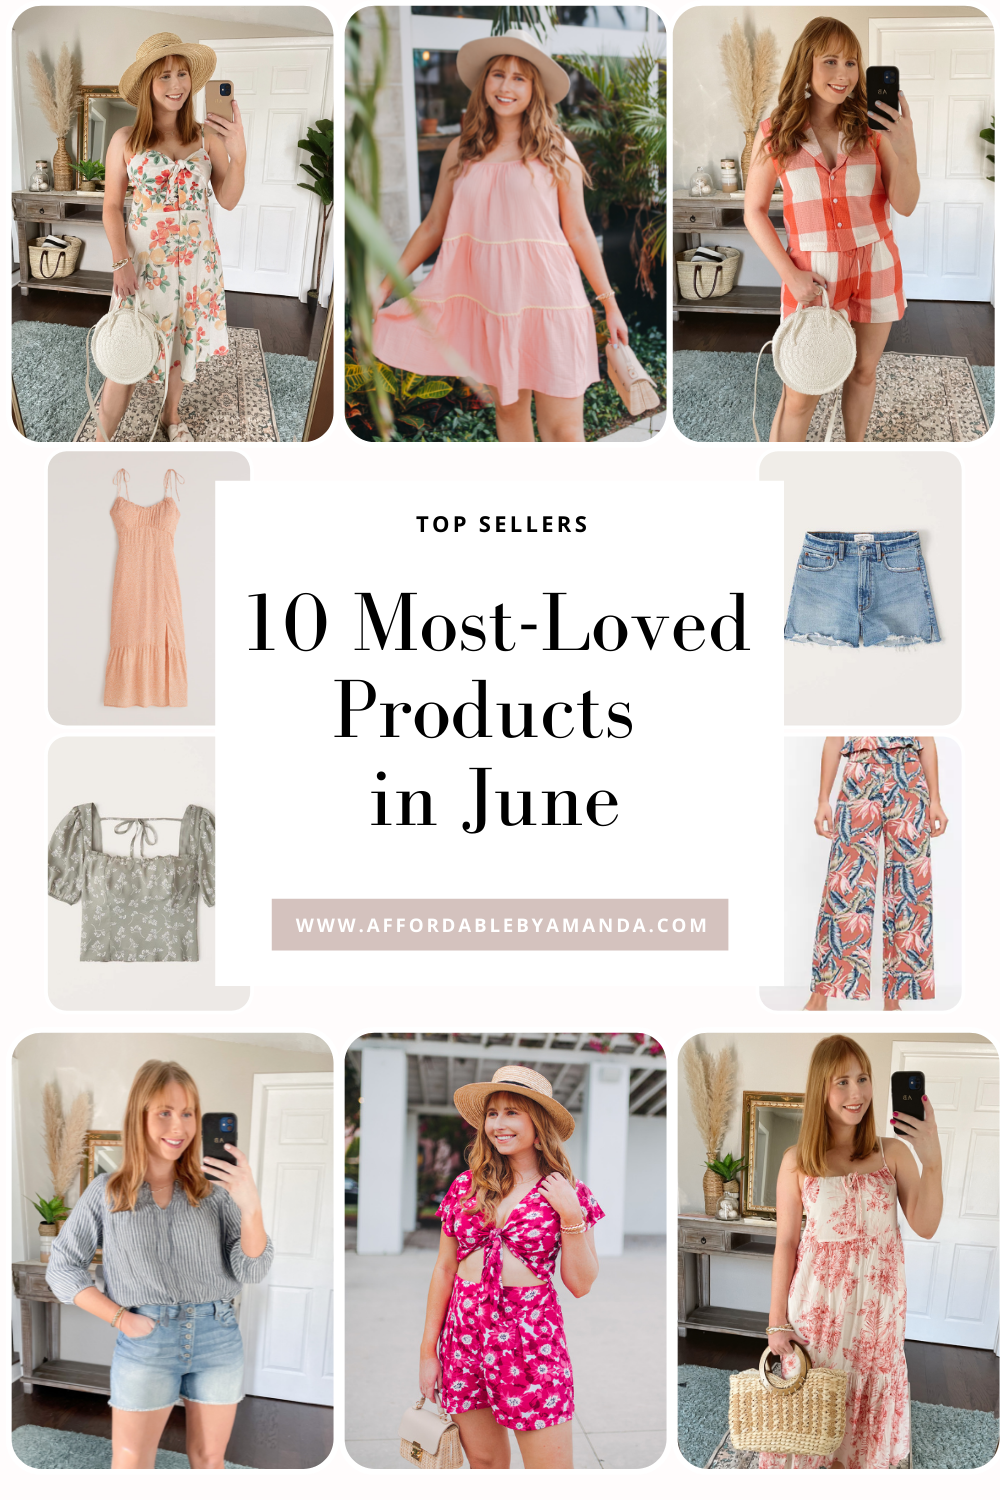 10 Most-Loved Products in June - Affordable by Amanda